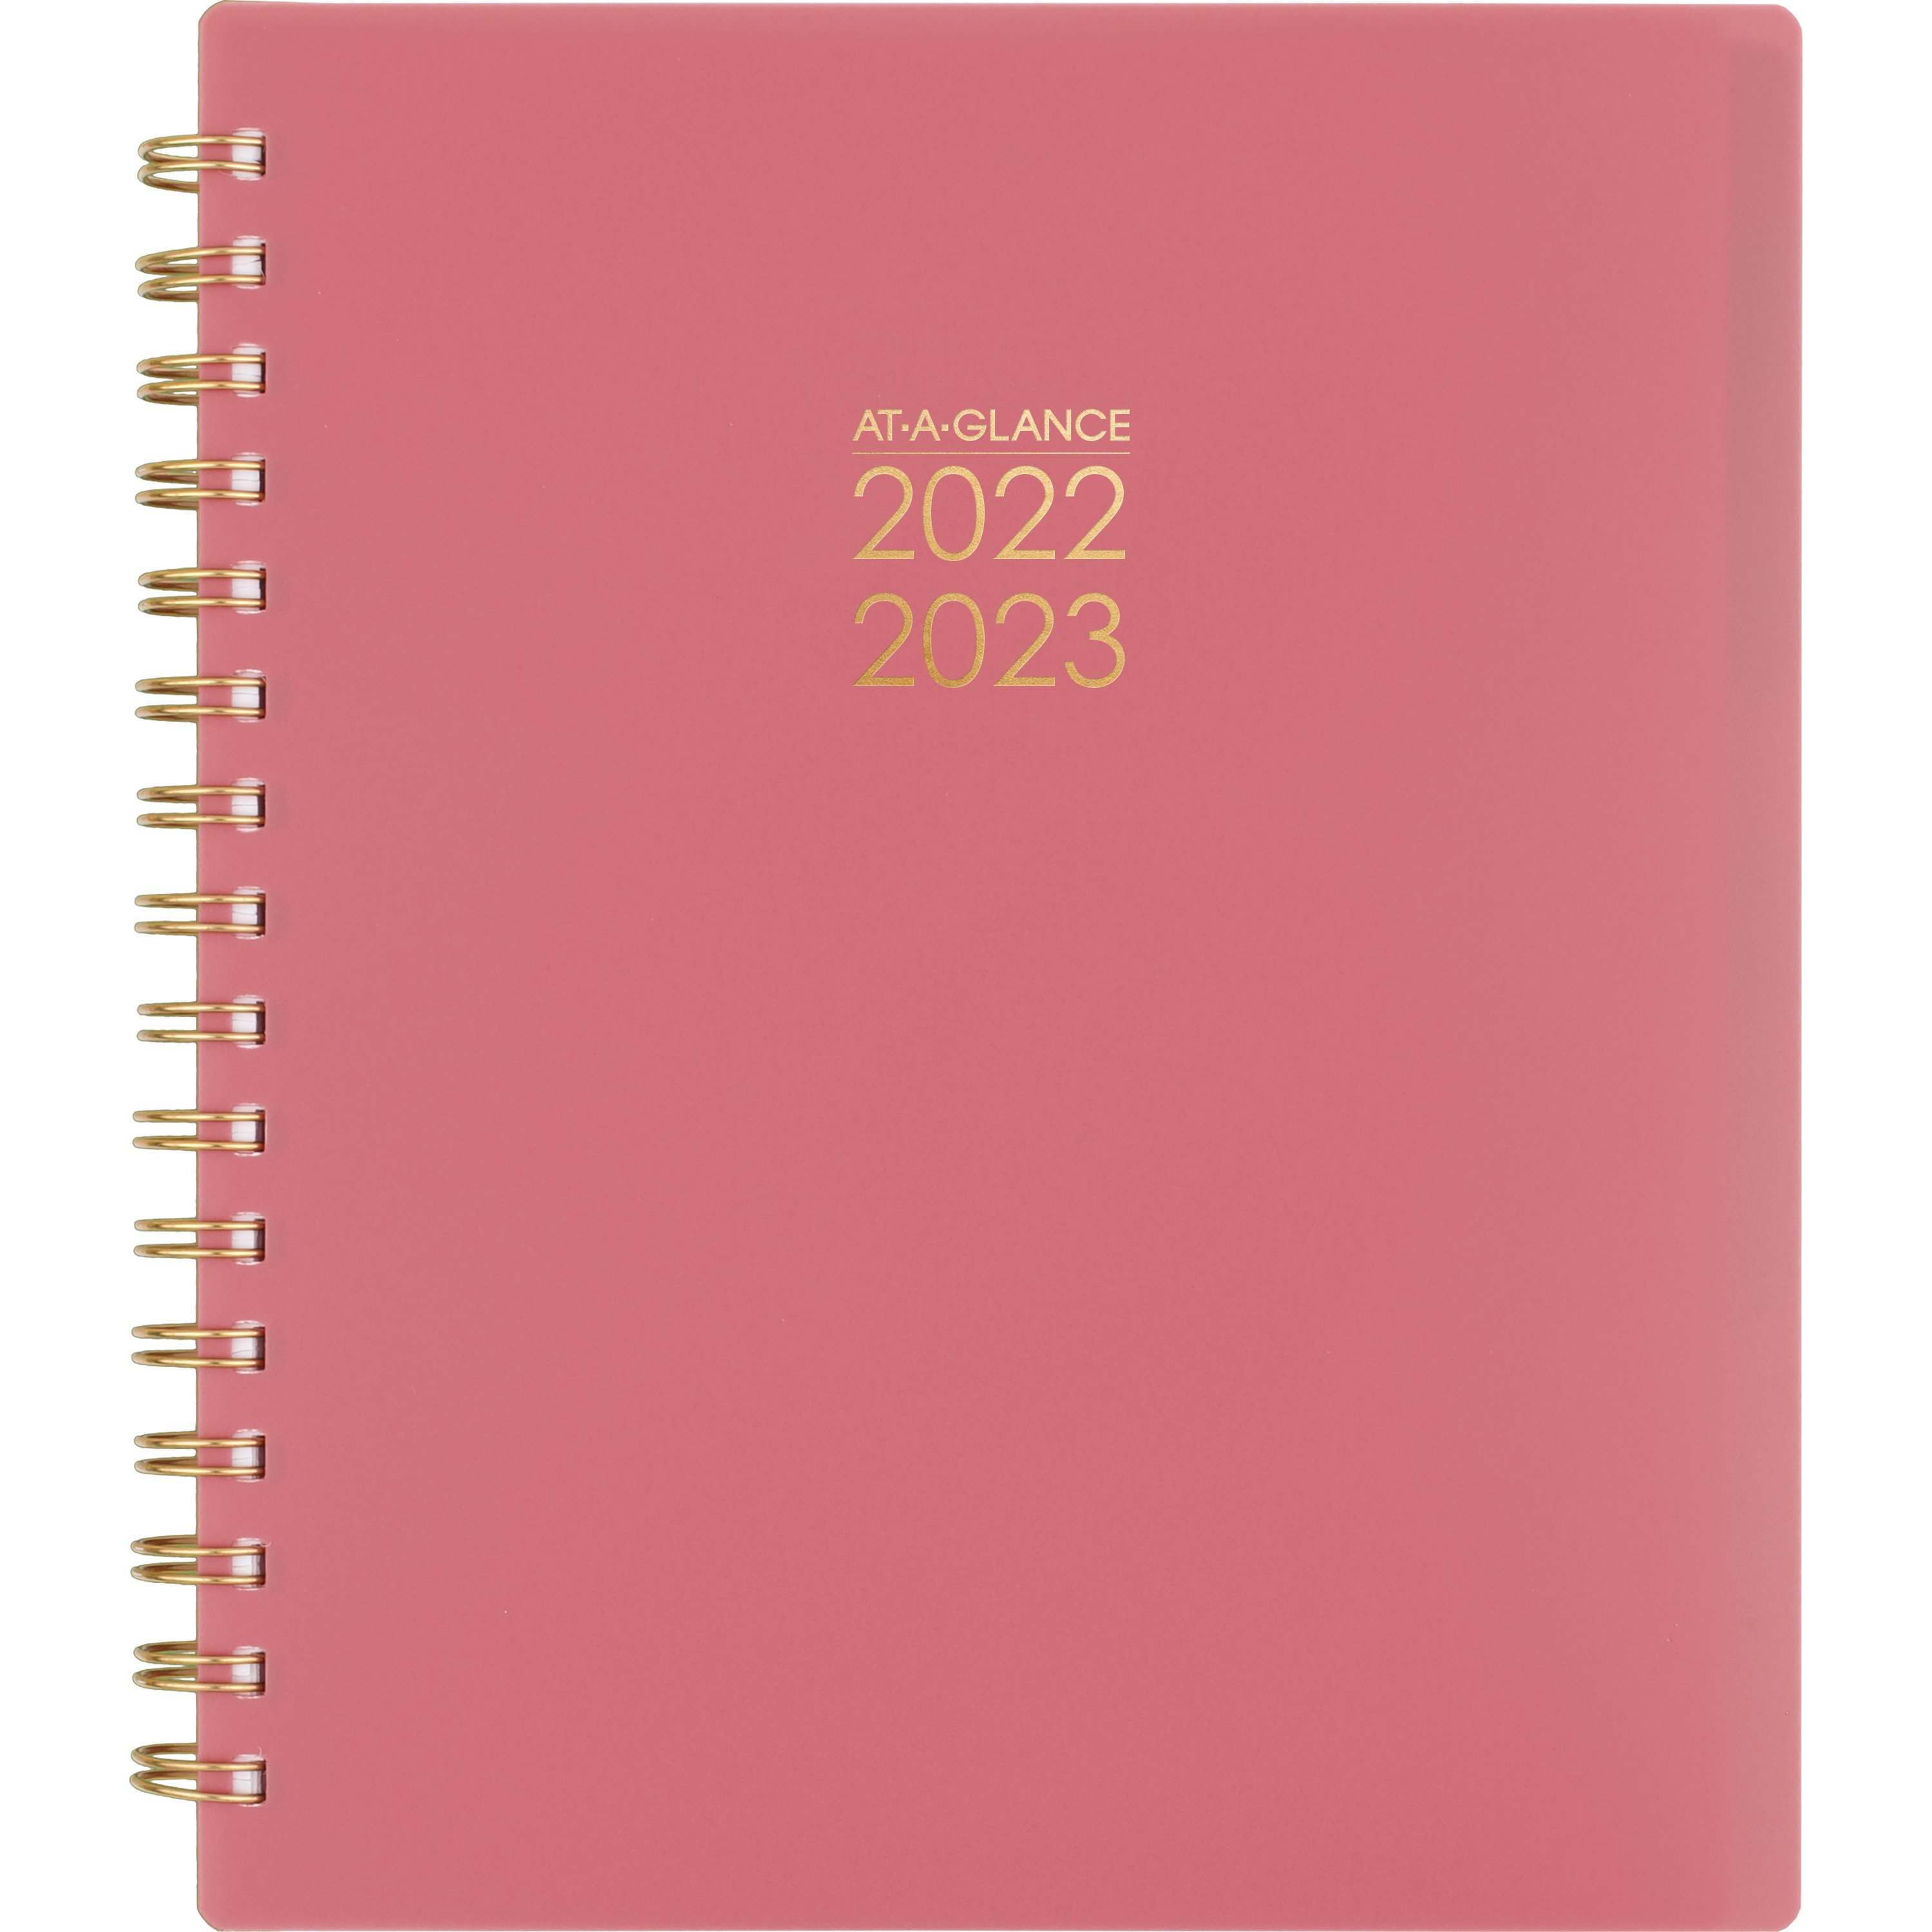 AT-A-GLANCE(R) Harmony Academic 2022-2023 Weekly Monthly Planner, Pink, Medium, 7" x 8 3/4"